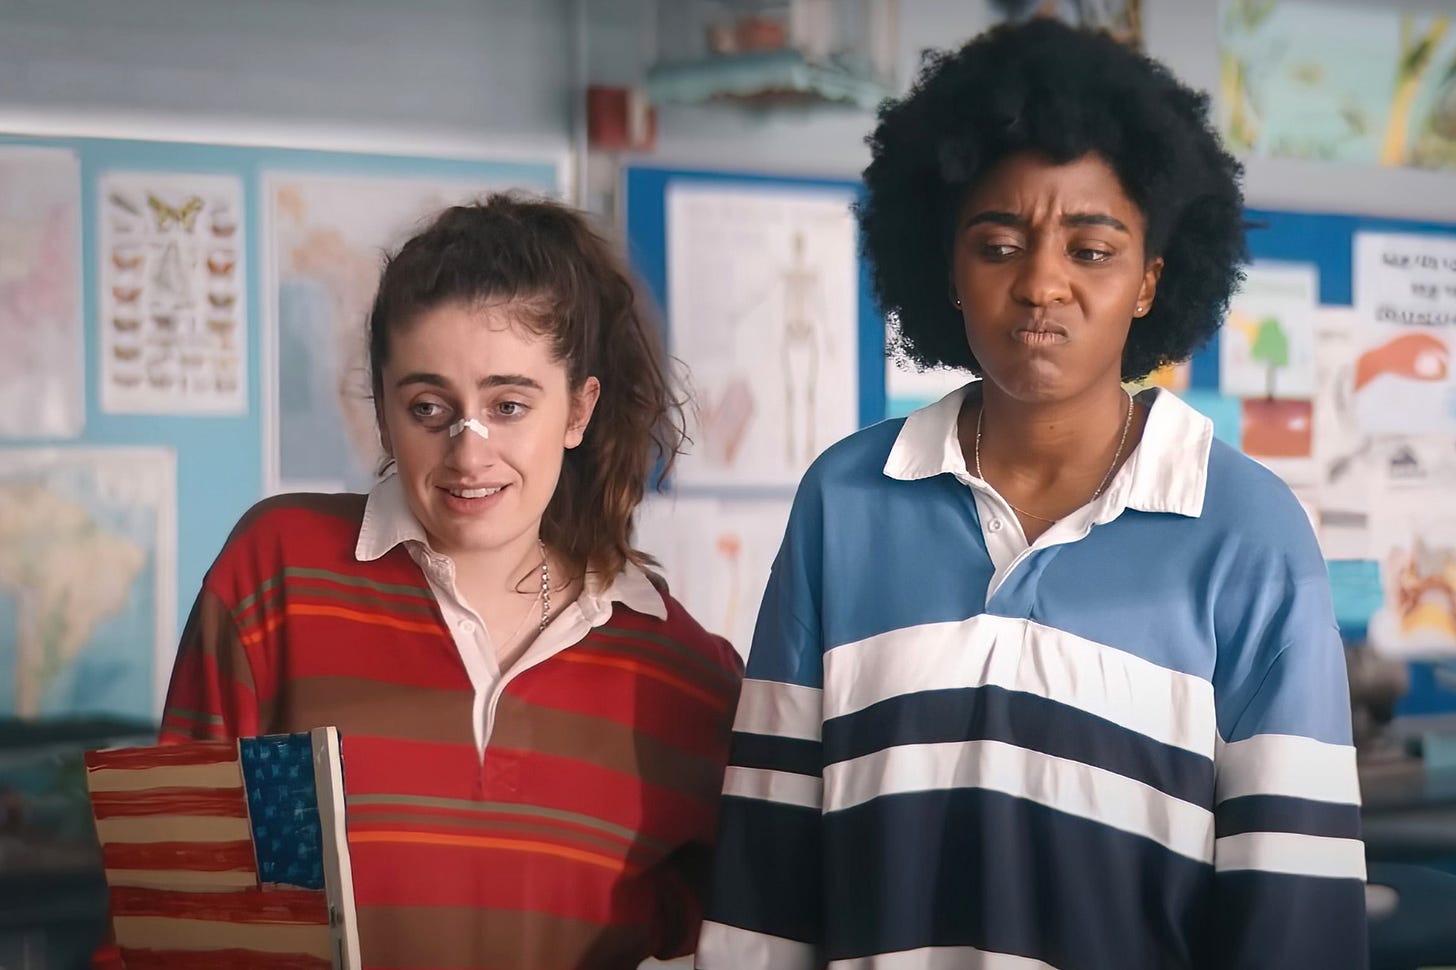 Bottoms' review: High school comedy is weird, not funny